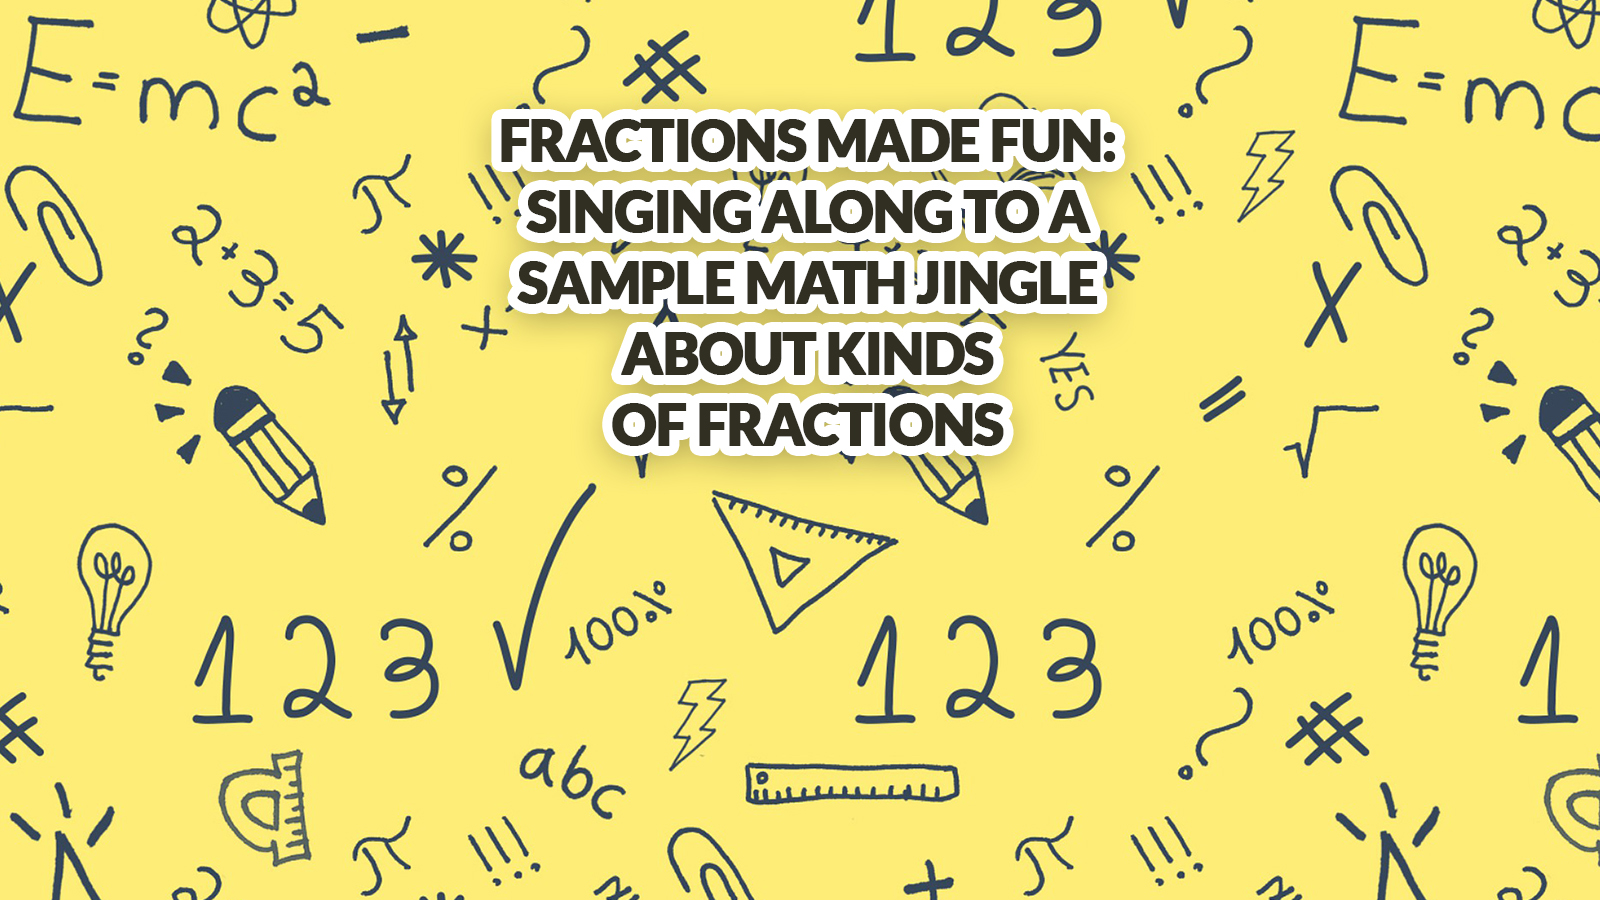 Fractions Made Fun: Singing Along to a Sample Math Jingle About Kinds of Fractions